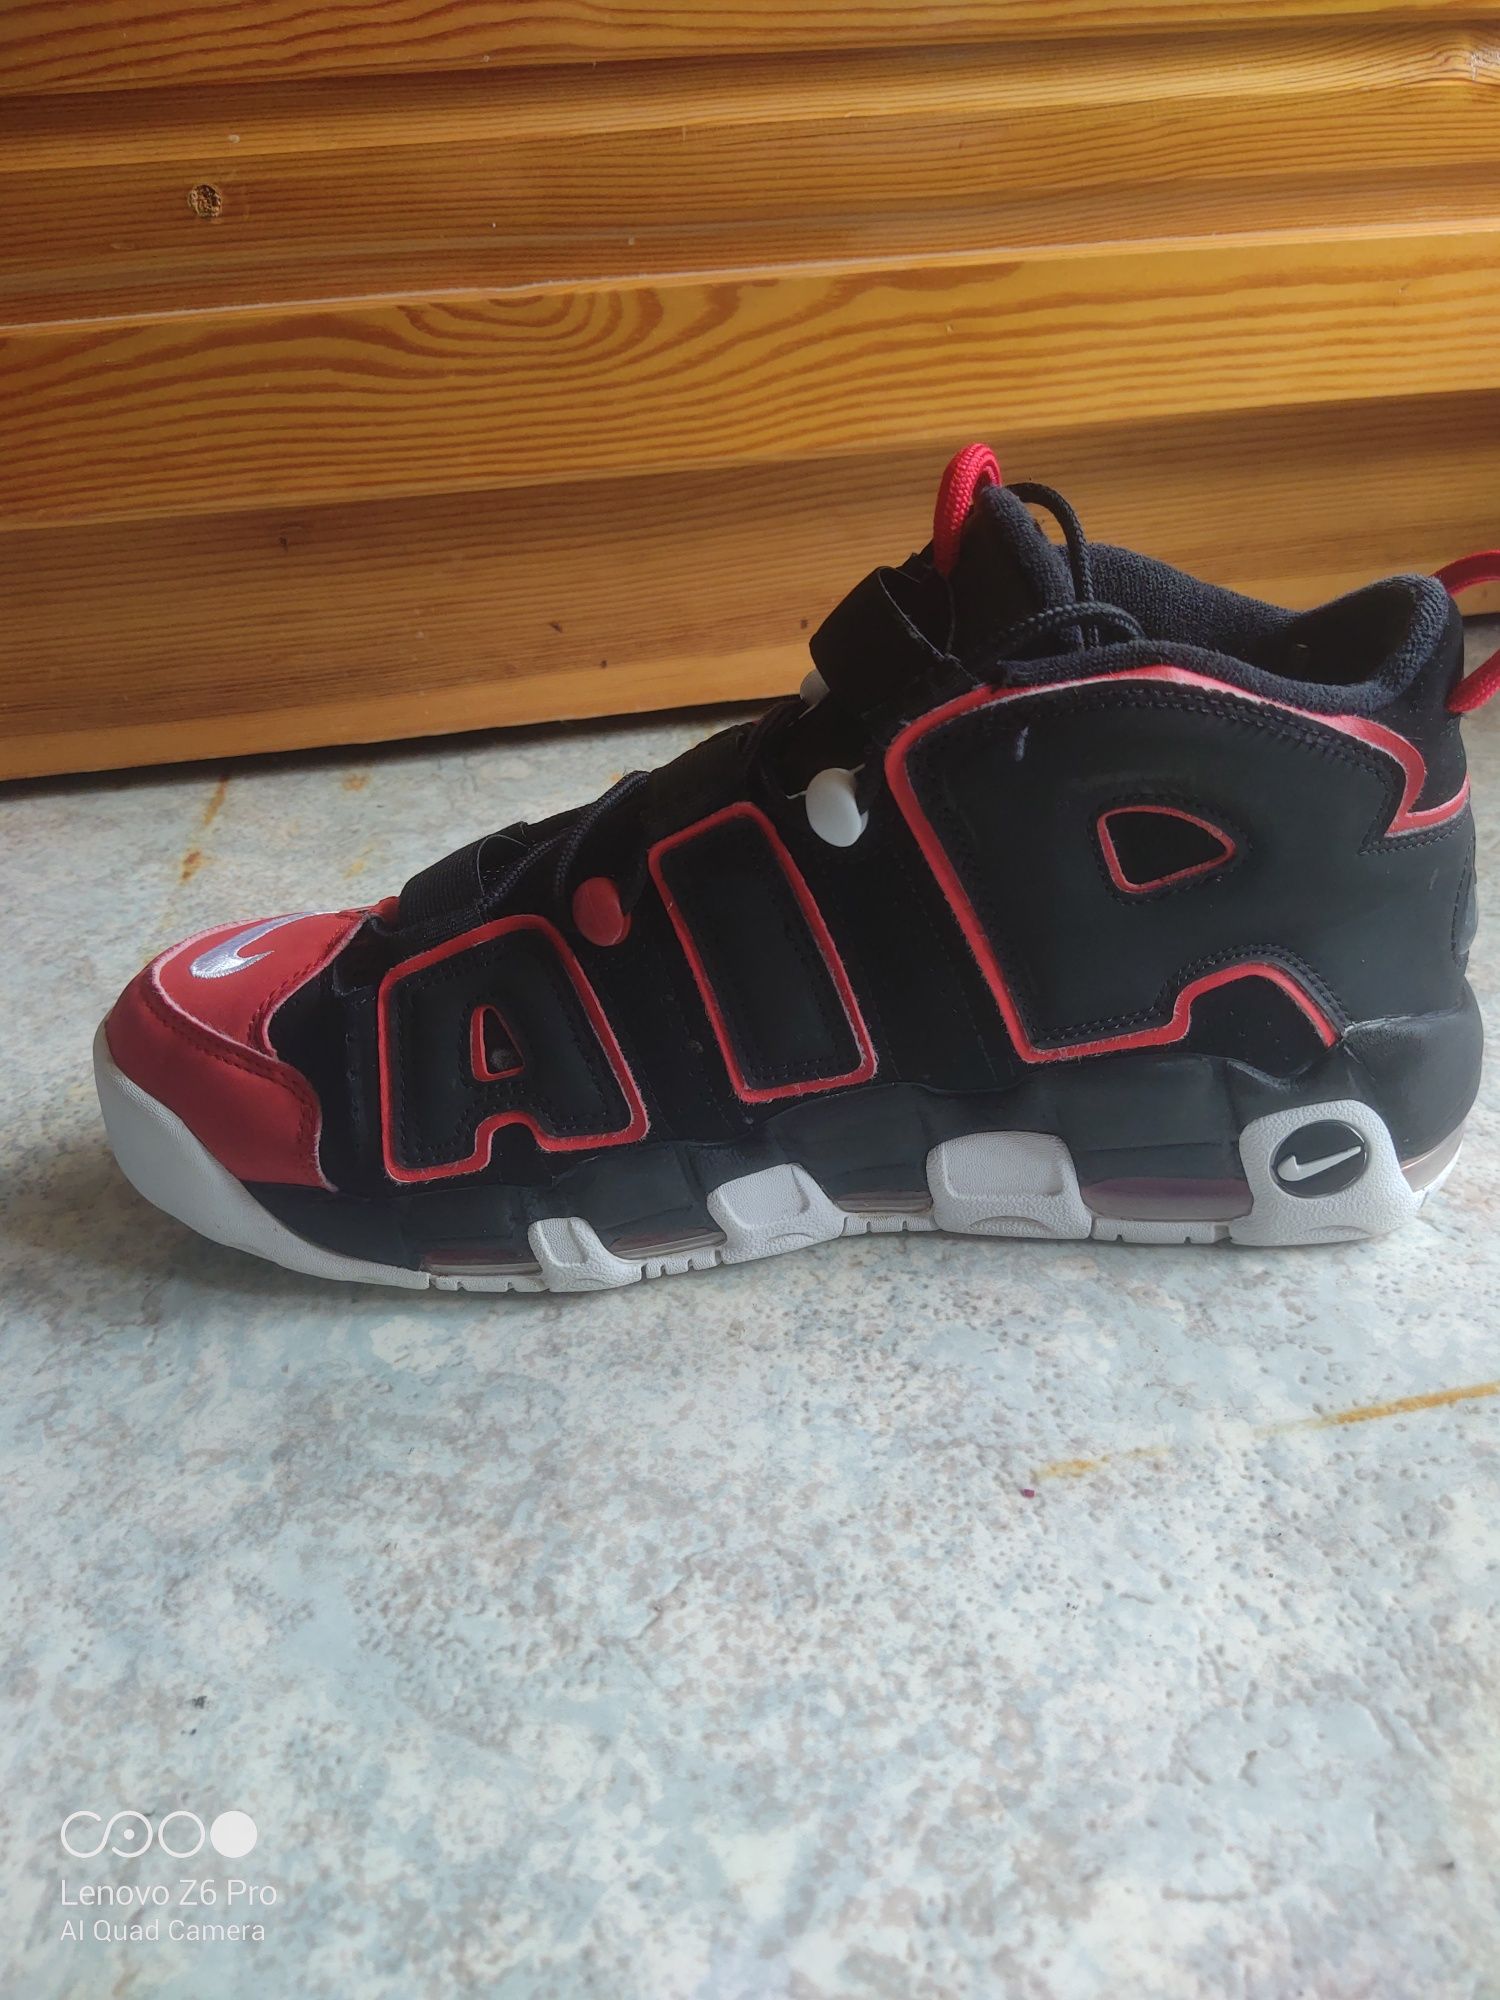 Nike Air more uptendo(red)